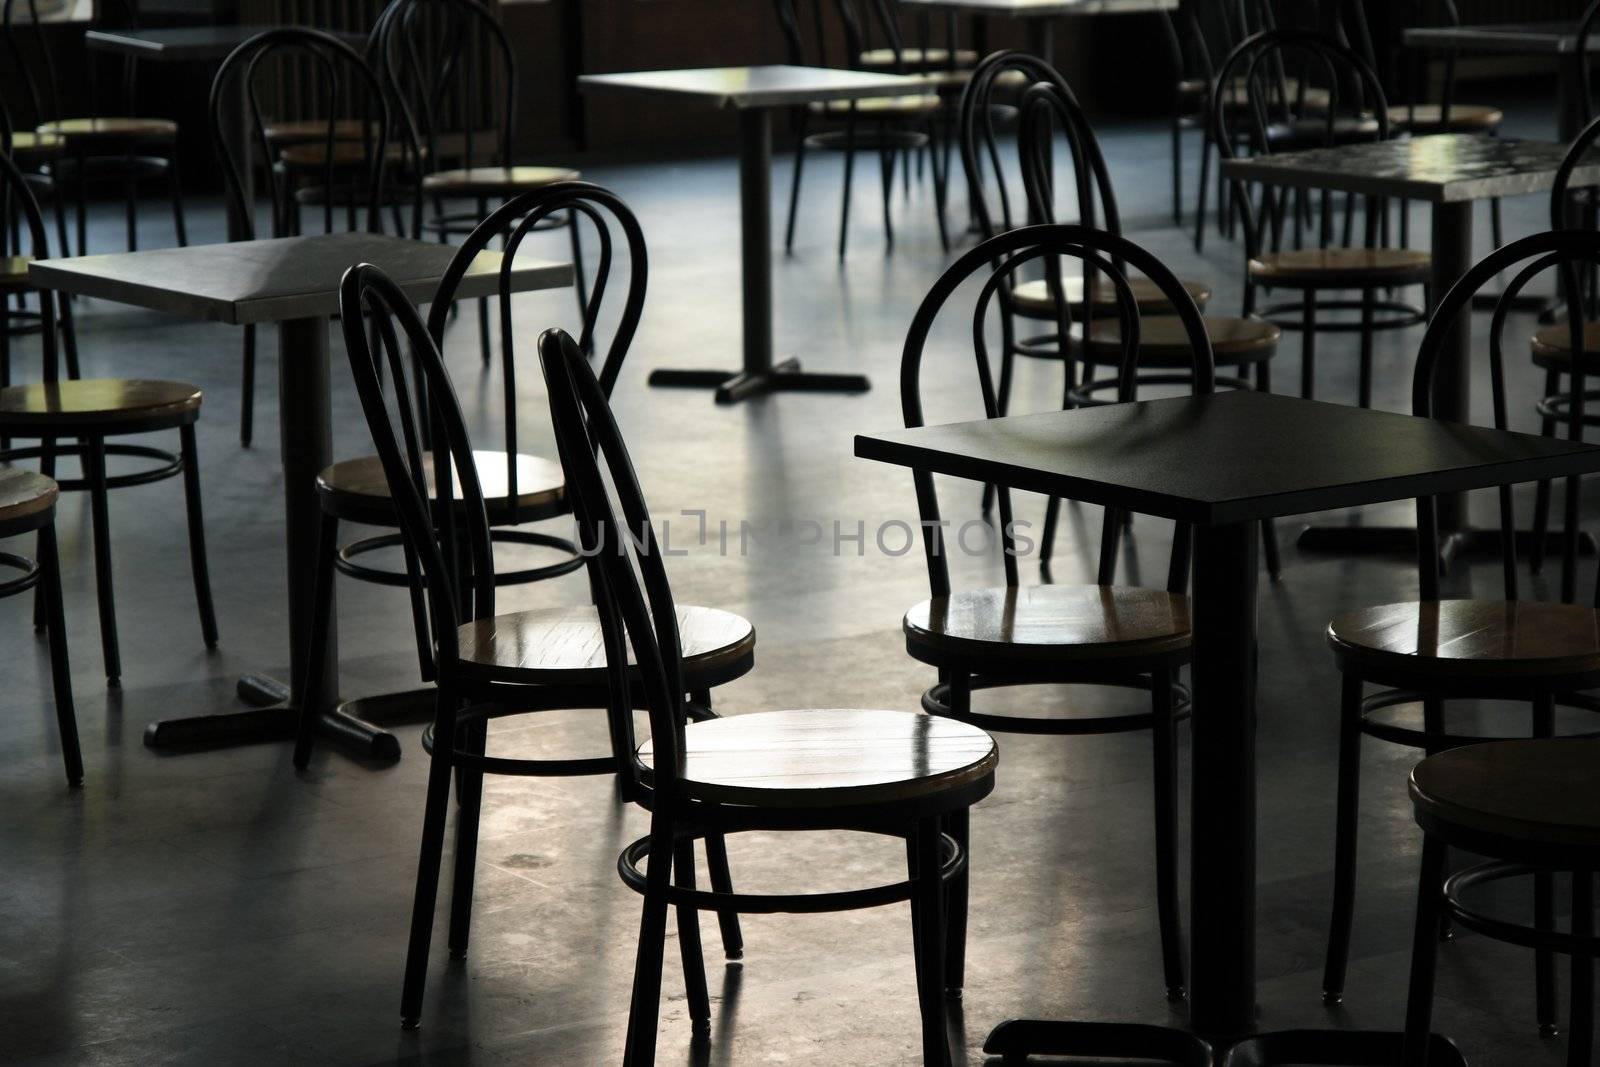 Tables and chairs in a cafeteria by anikasalsera